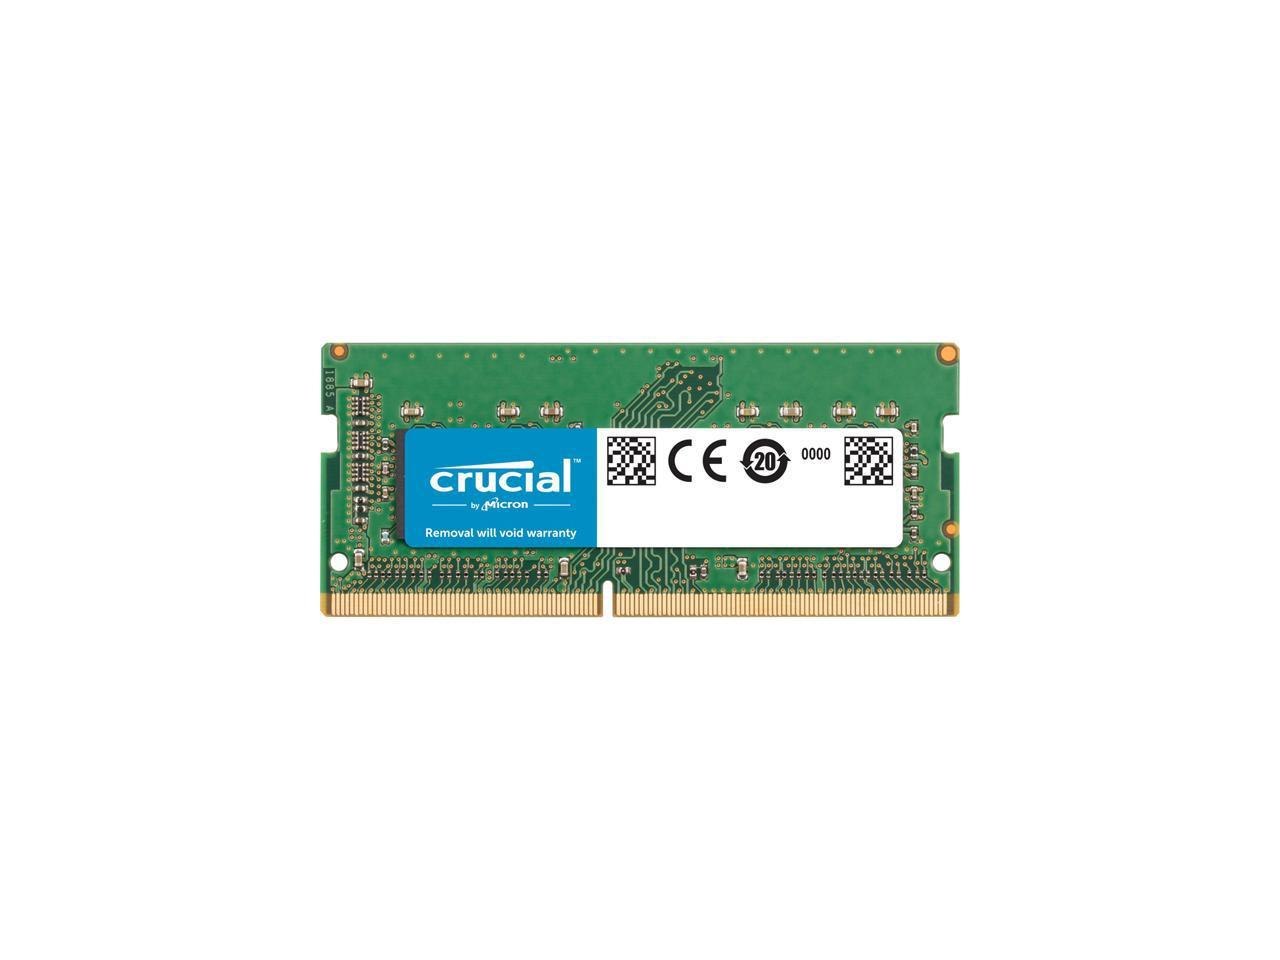 Crucial 8GB DDR4 2666 (PC4 21300) Unbuffered Memory For Apple Model CT8G4S266M